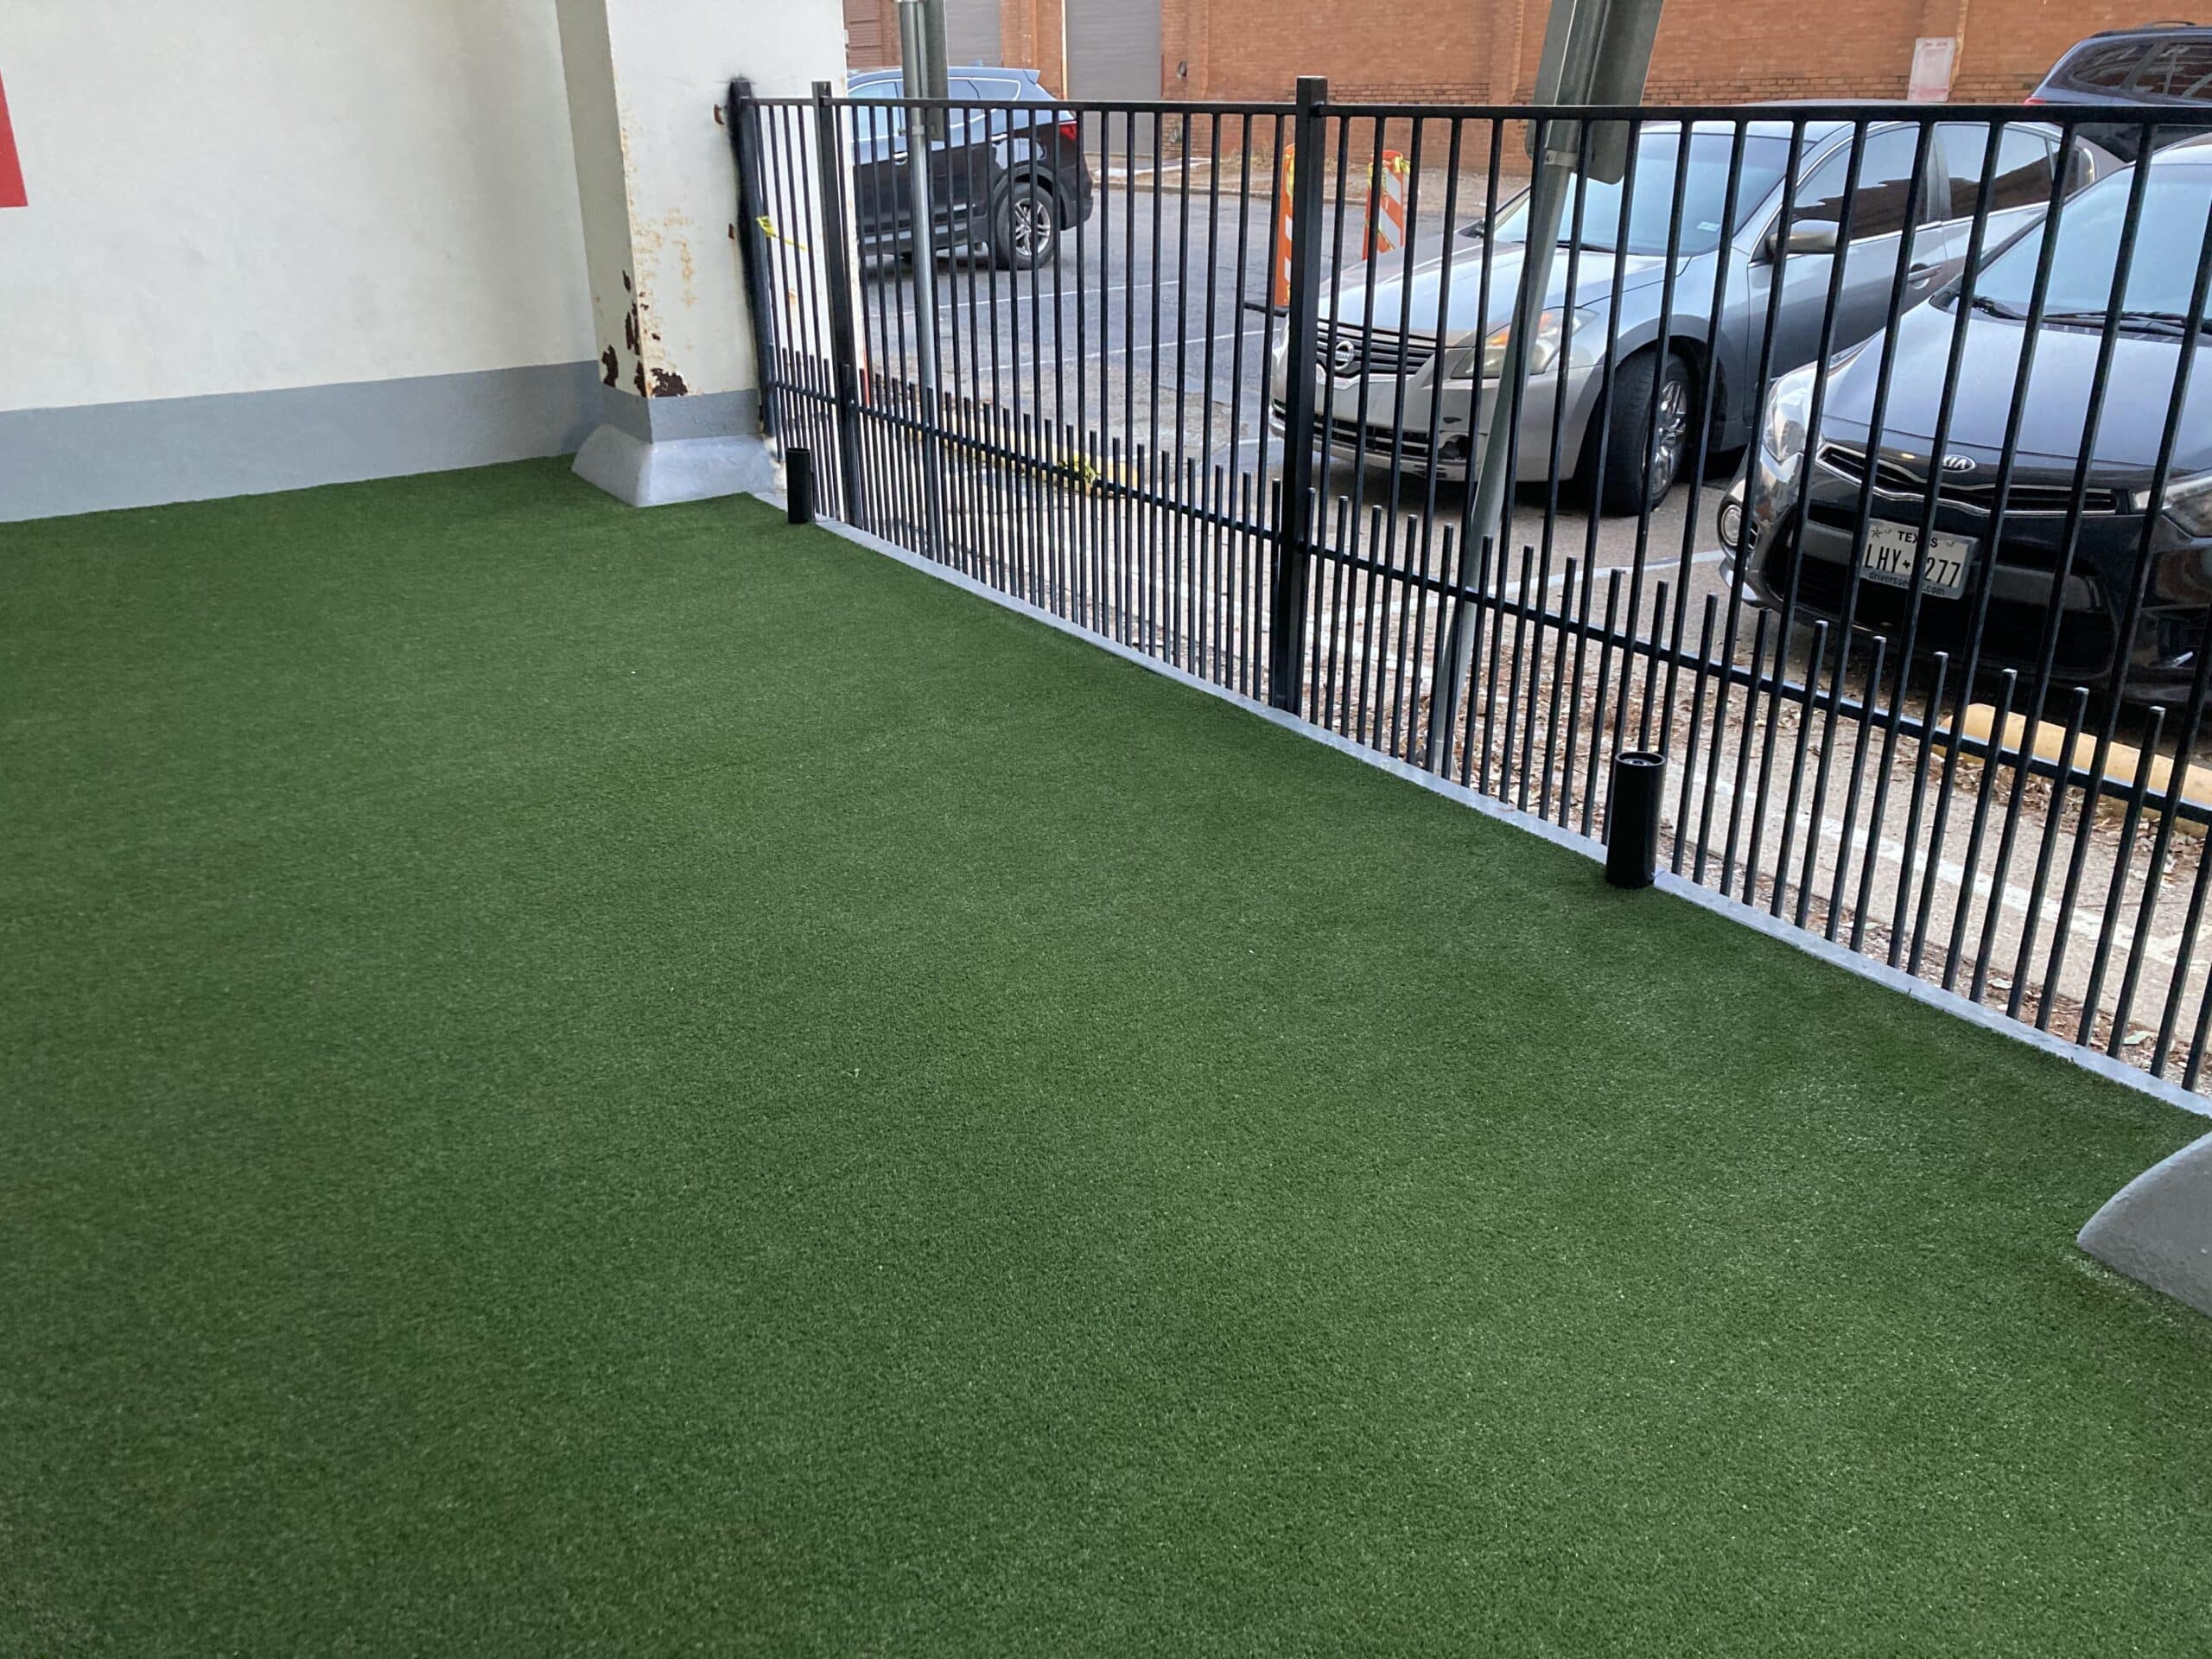 Pet relief area in an apartment complex